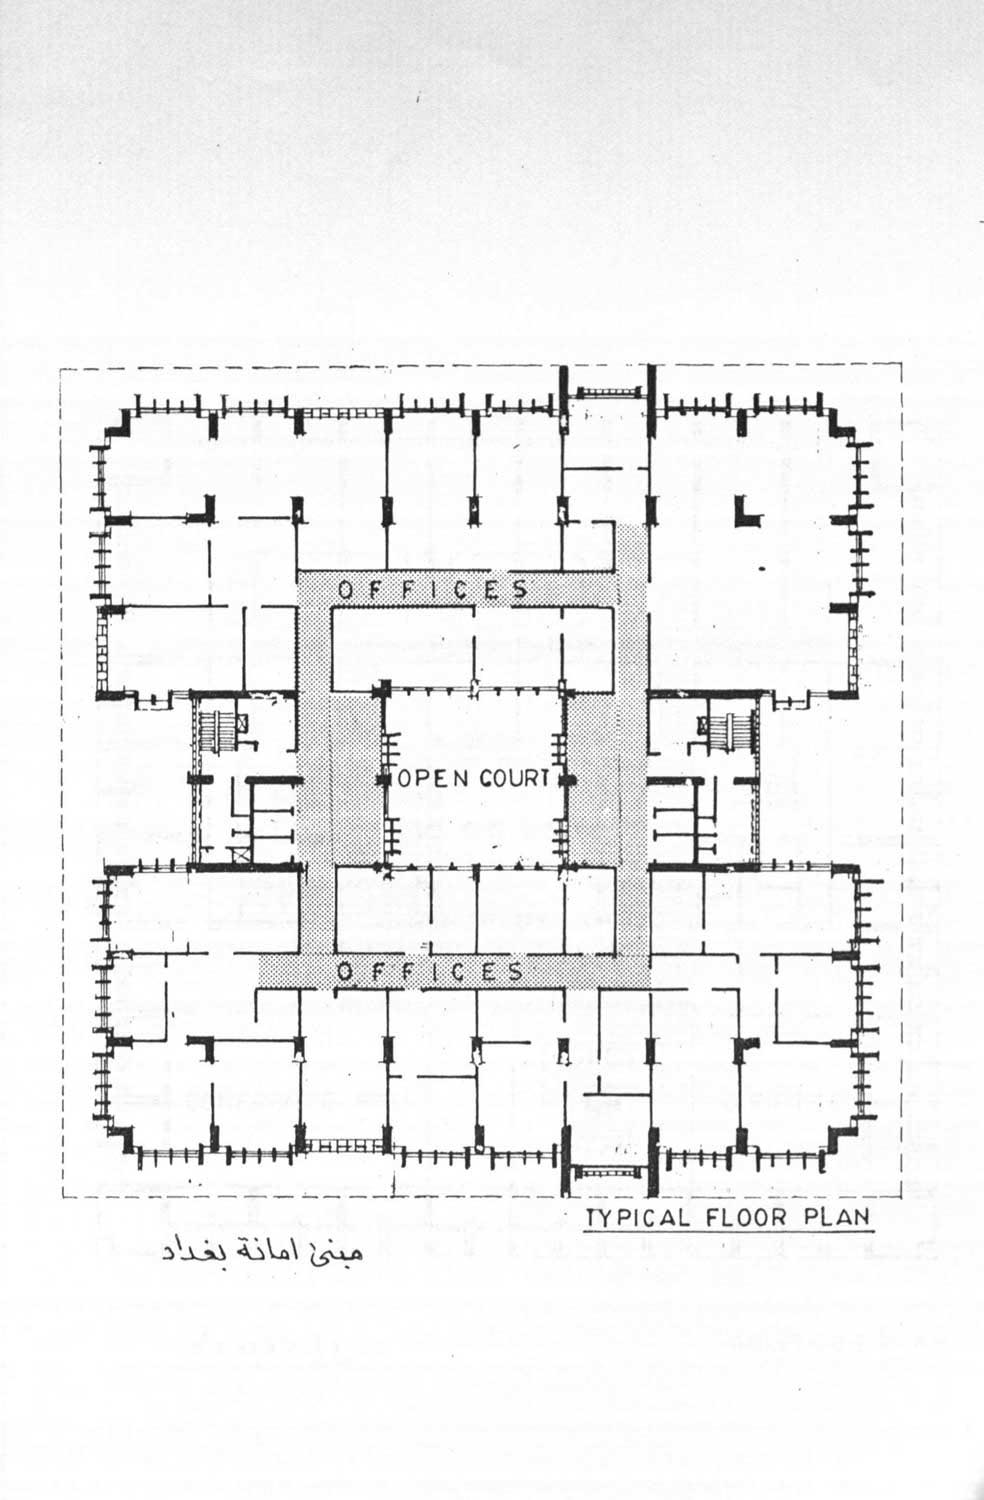 A typical floor plan from the Mayor's Office building, designed to house departmental offices.